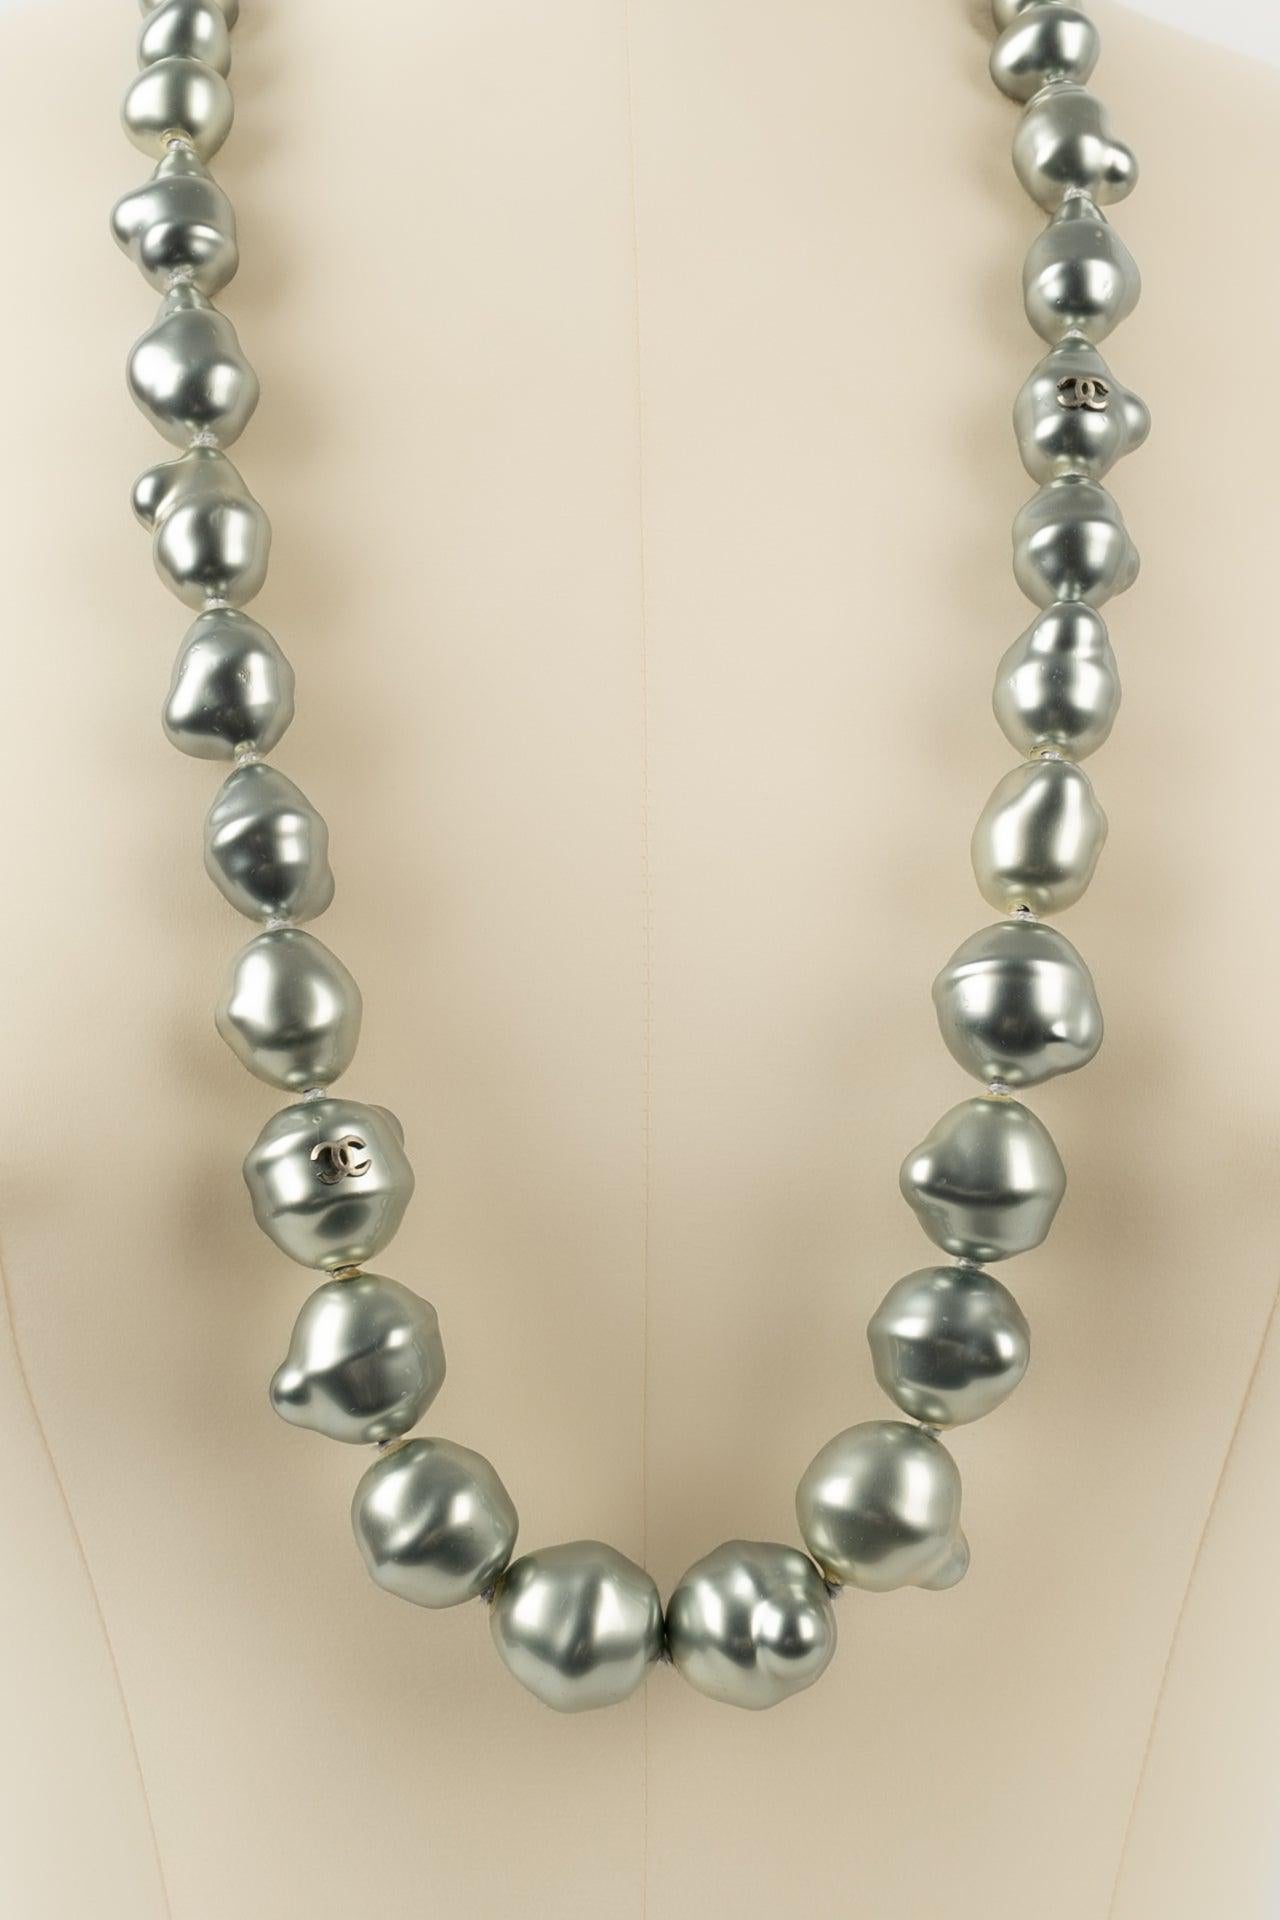 Chanel Necklace Spring Grey Pearly Baroque Beads, 1998 In Excellent Condition For Sale In SAINT-OUEN-SUR-SEINE, FR